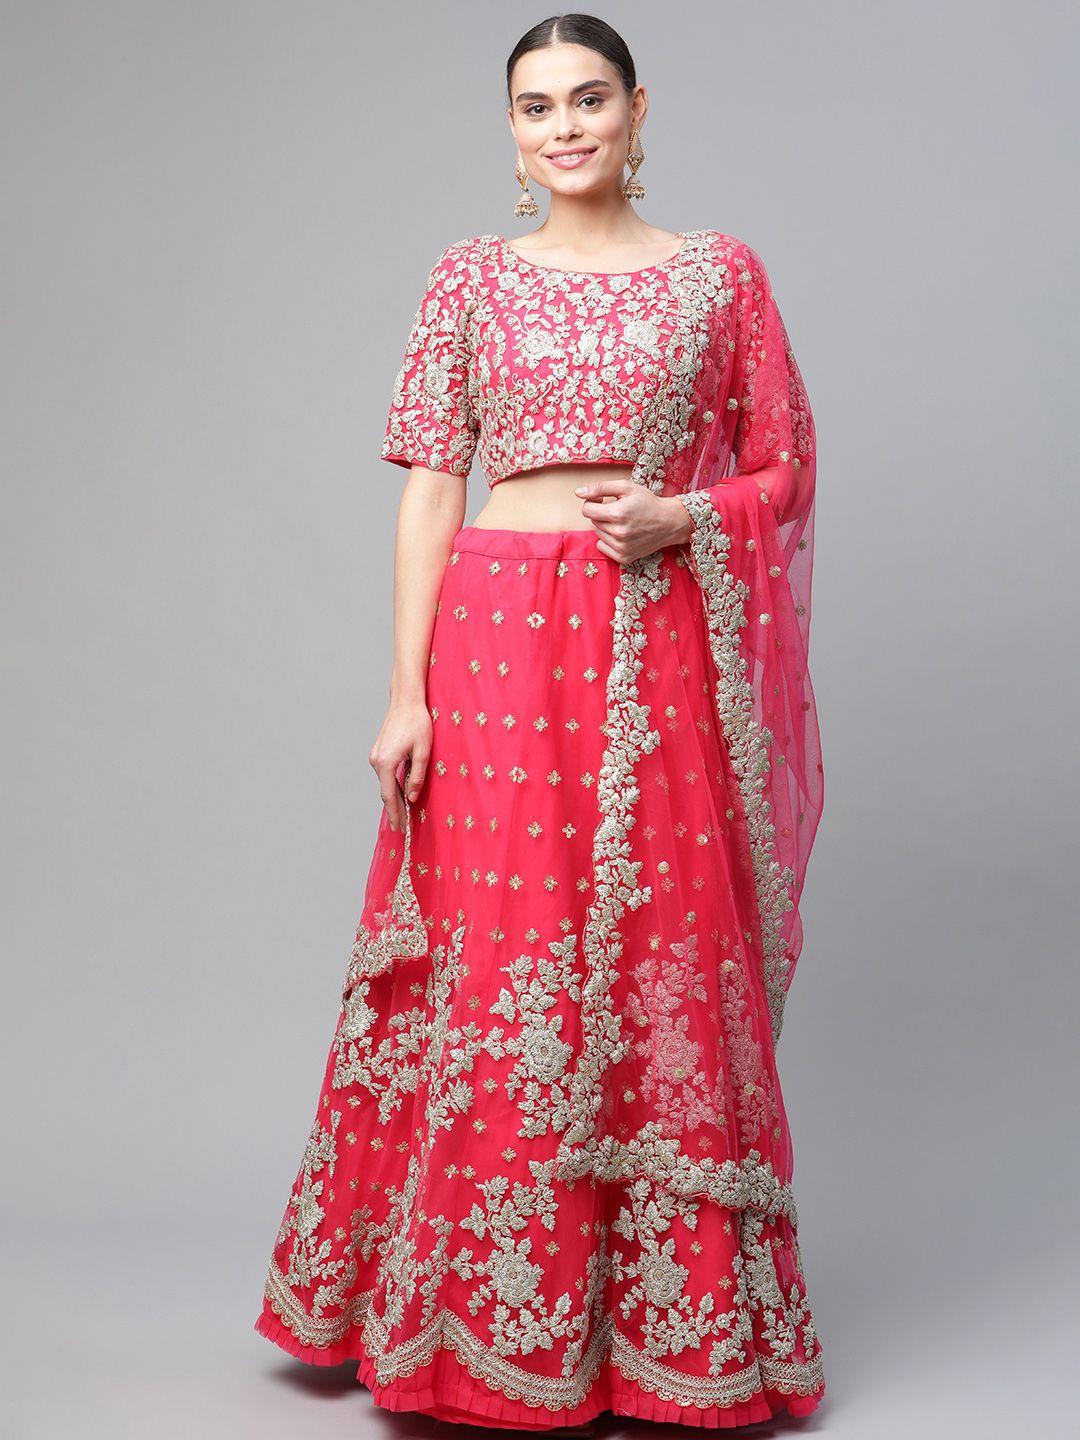 Readiprint Fashions Pink & Silver-Toned Embroidered Thread Work Semi-Stitched Lehenga & Unstitched Blouse